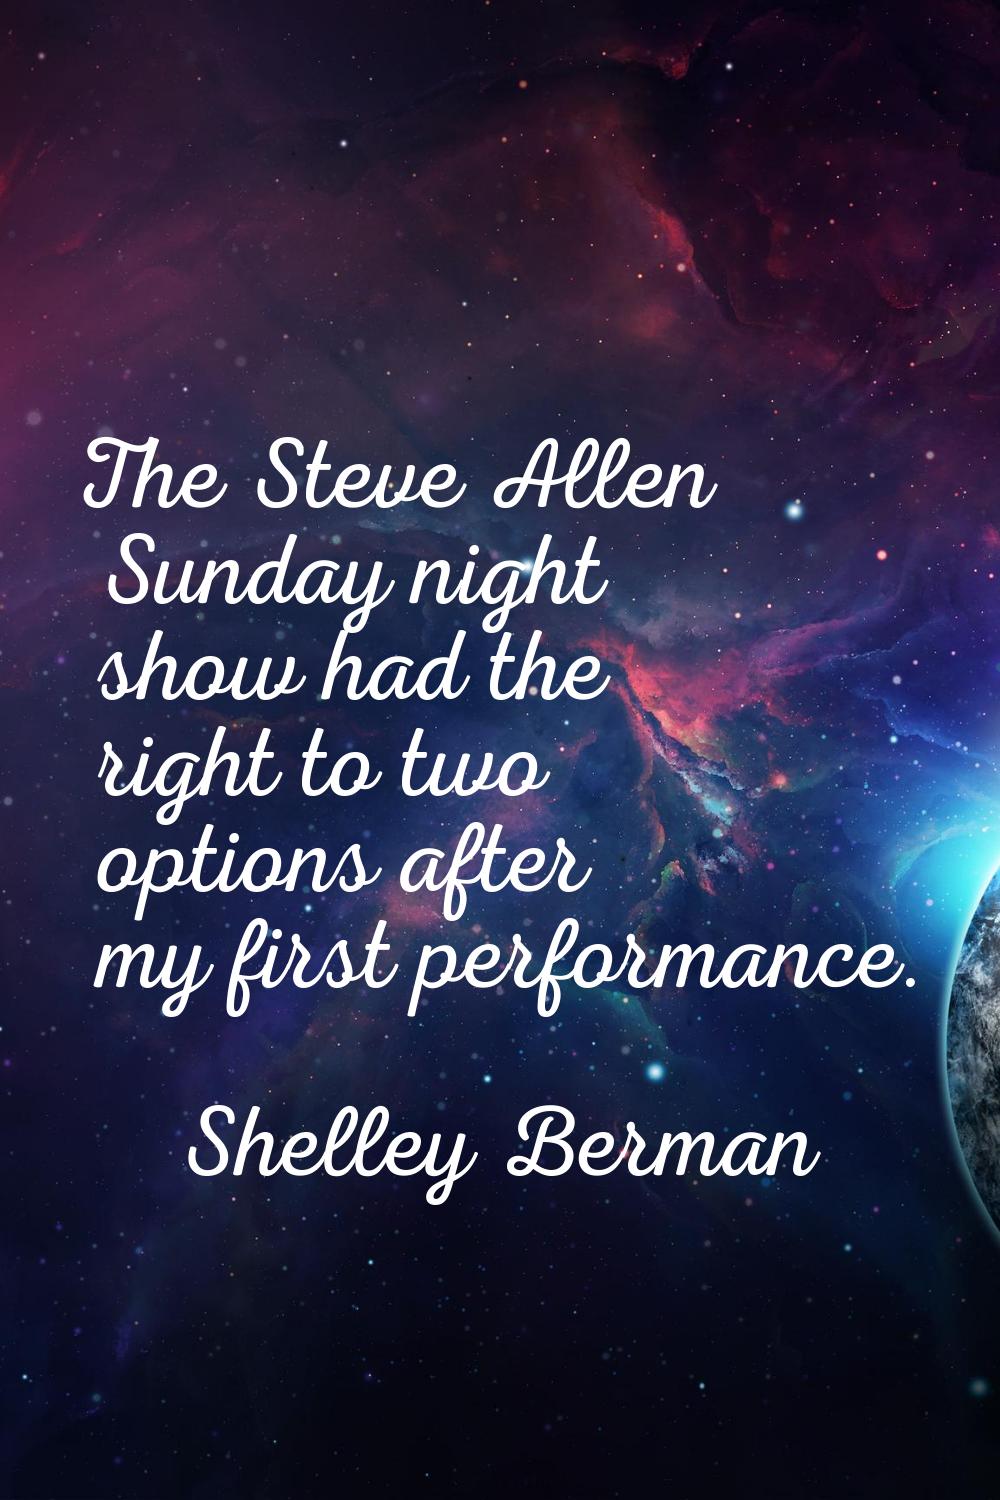 The Steve Allen Sunday night show had the right to two options after my first performance.